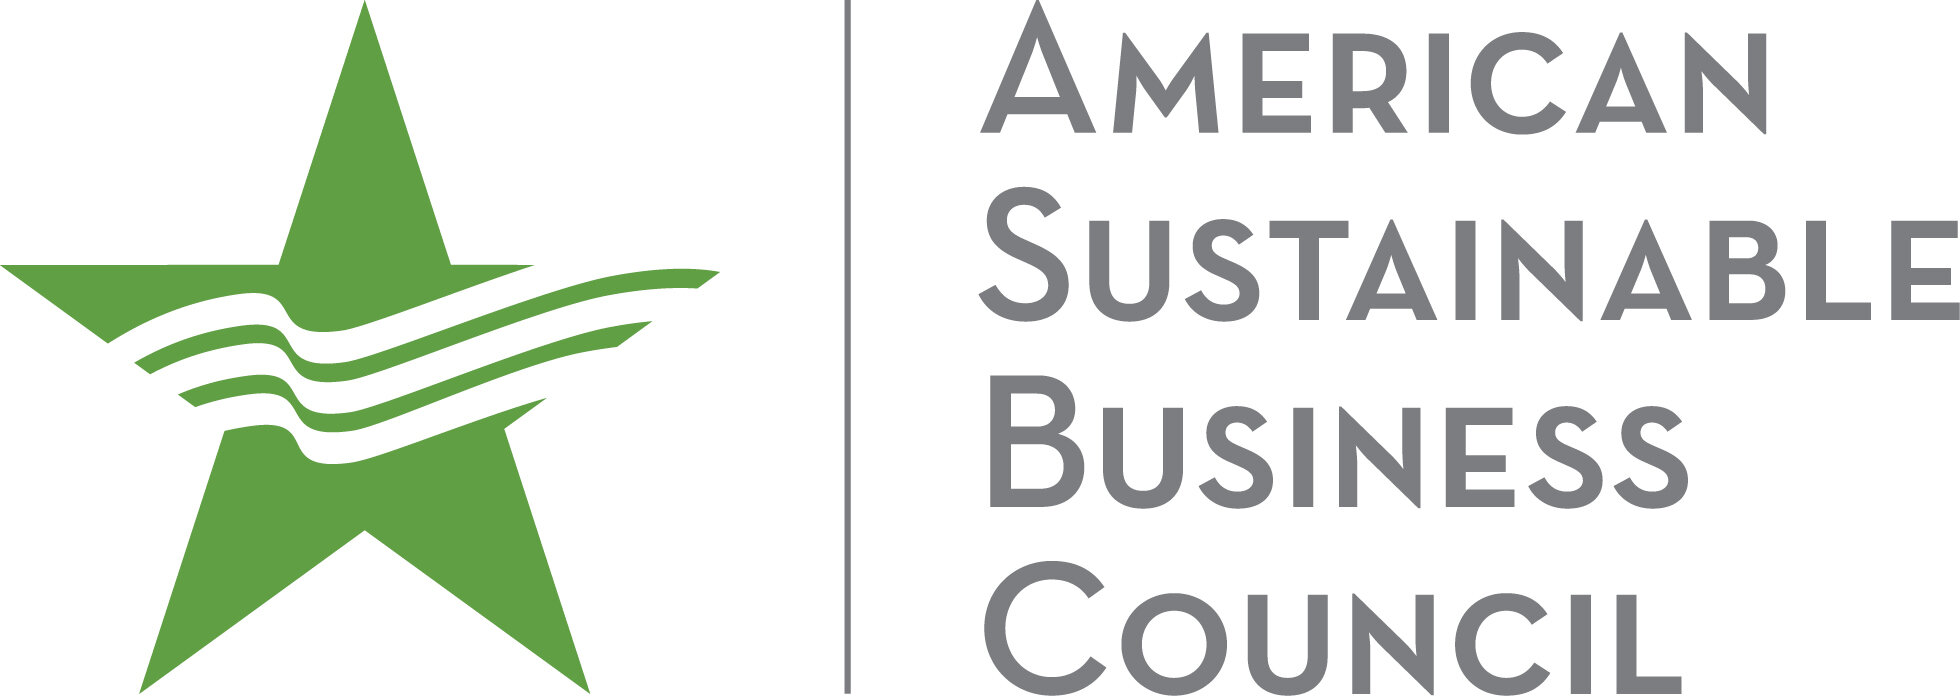 american sustainable business council.jpg